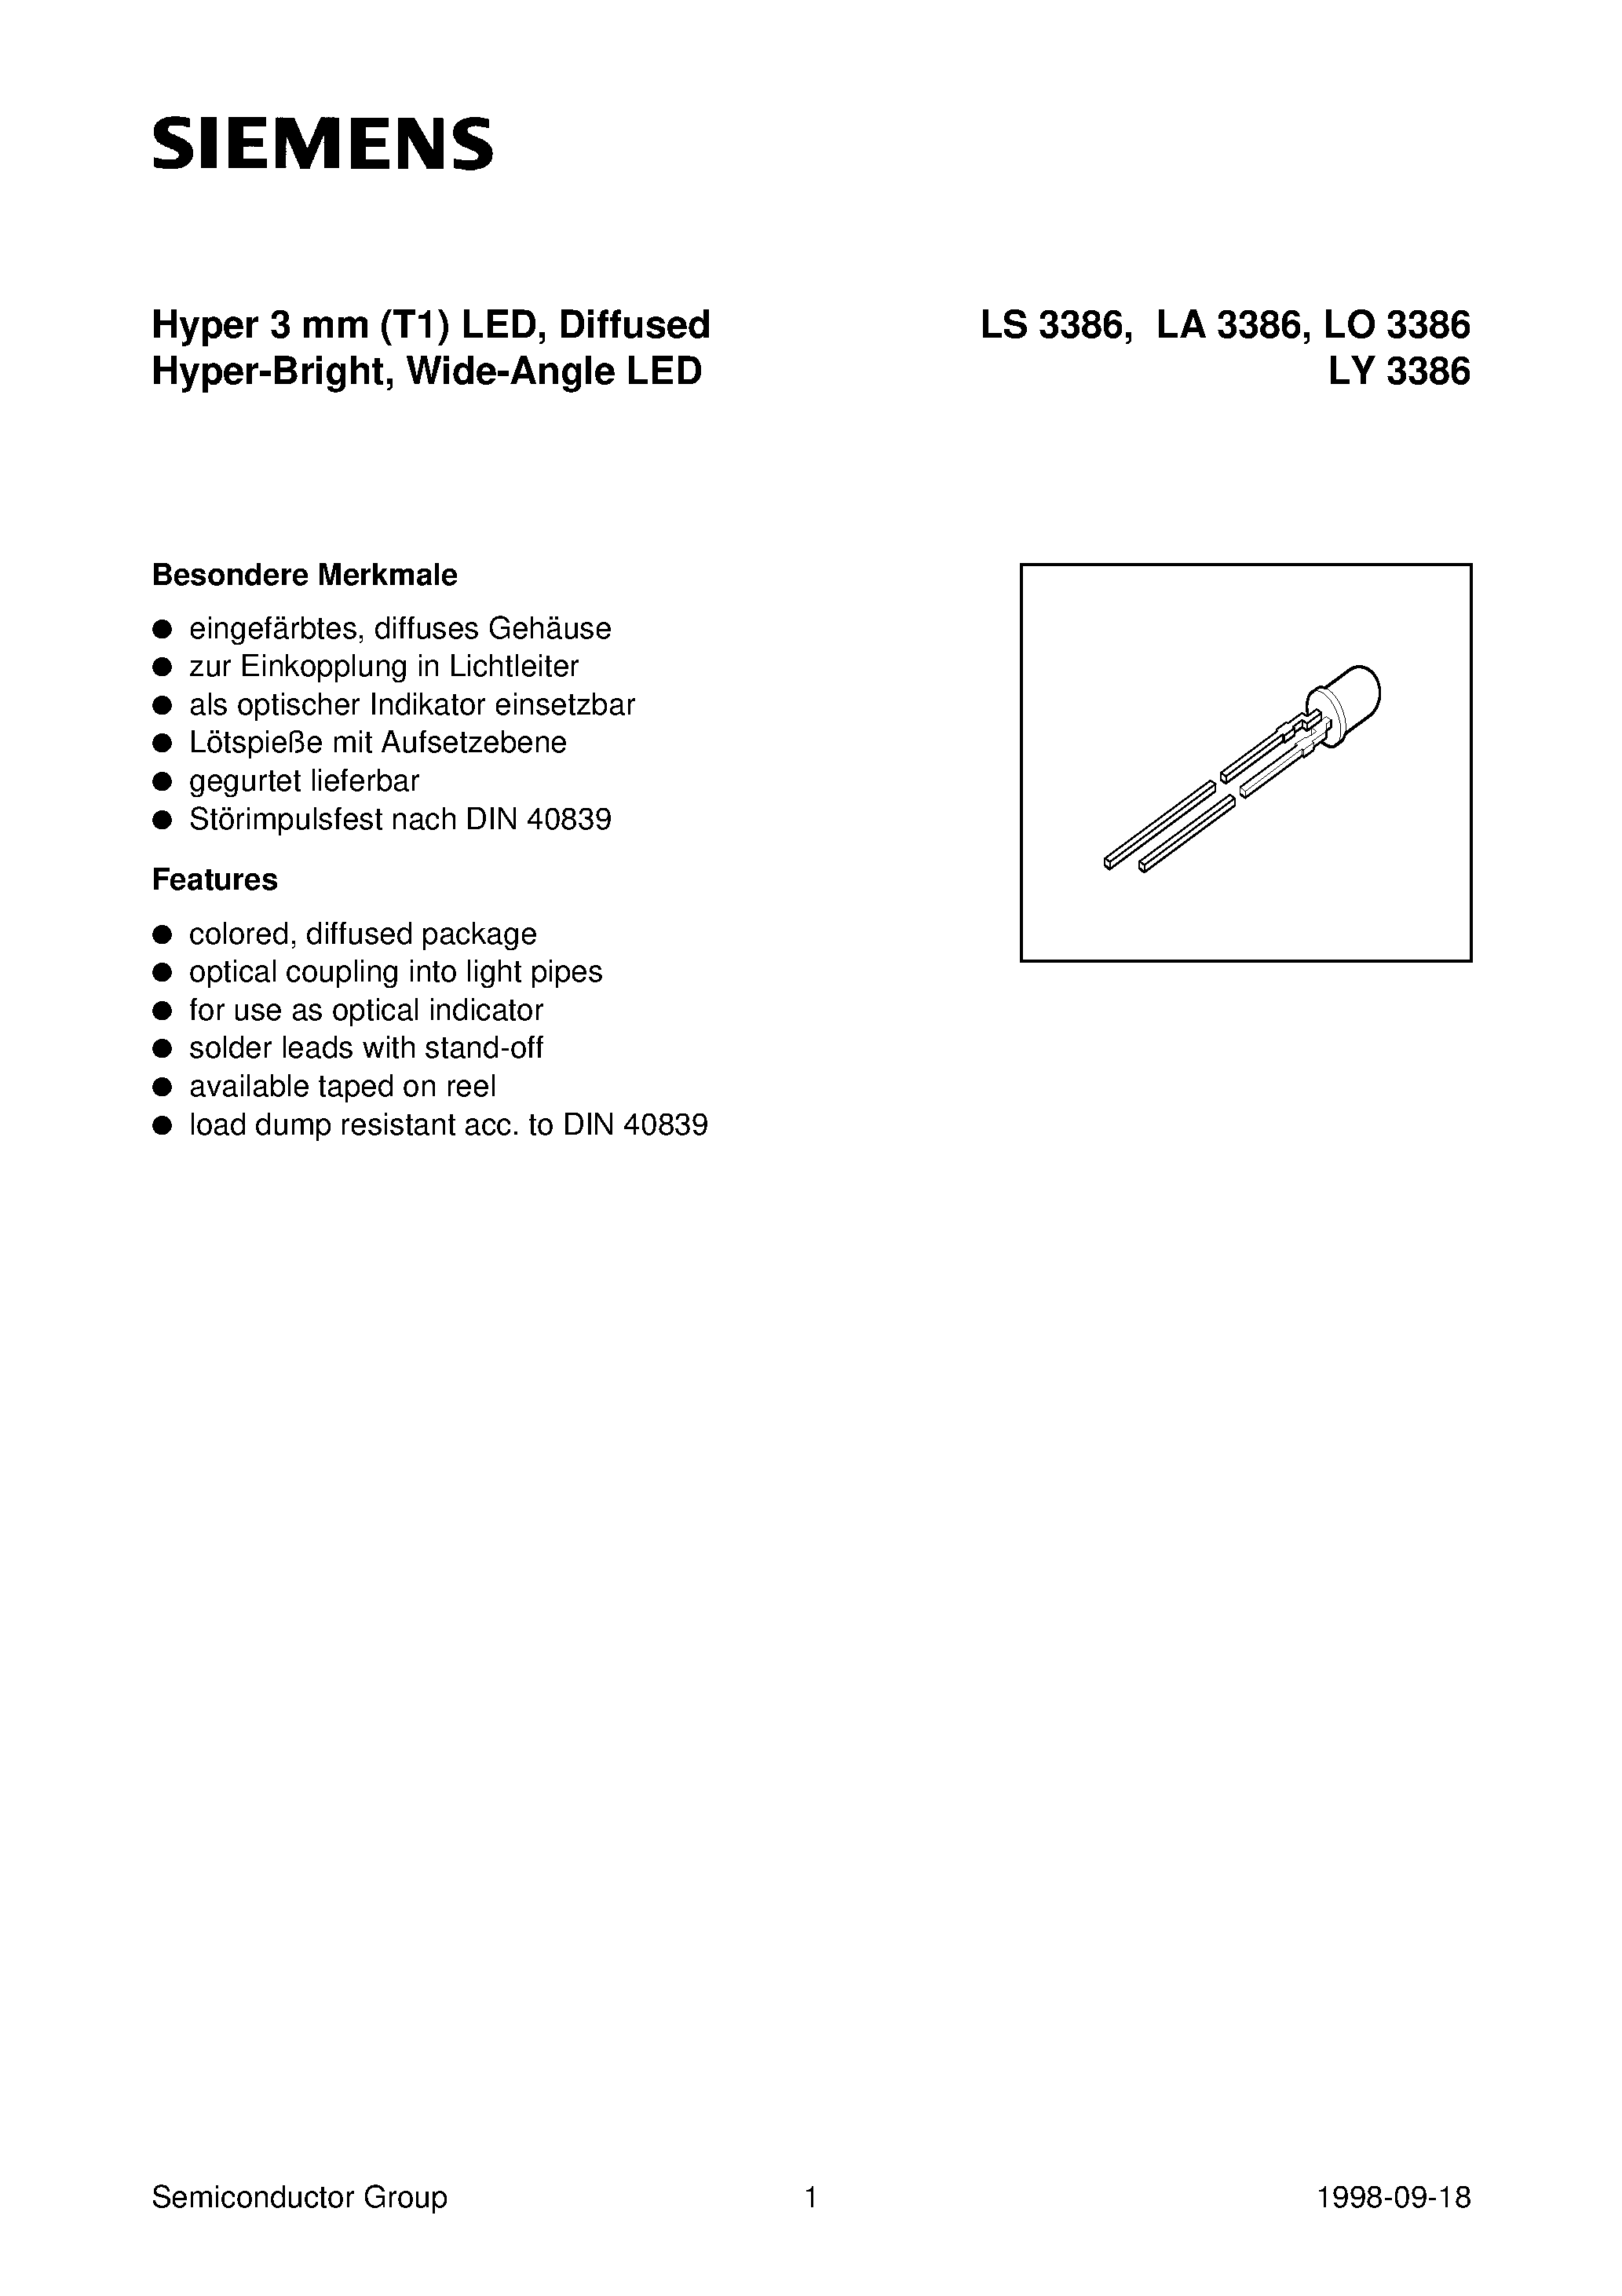 Datasheet LA3386-Q - Hyper 3 mm T1 LED/ Diffused Hyper-Bright/ Wide-Angle LED page 1